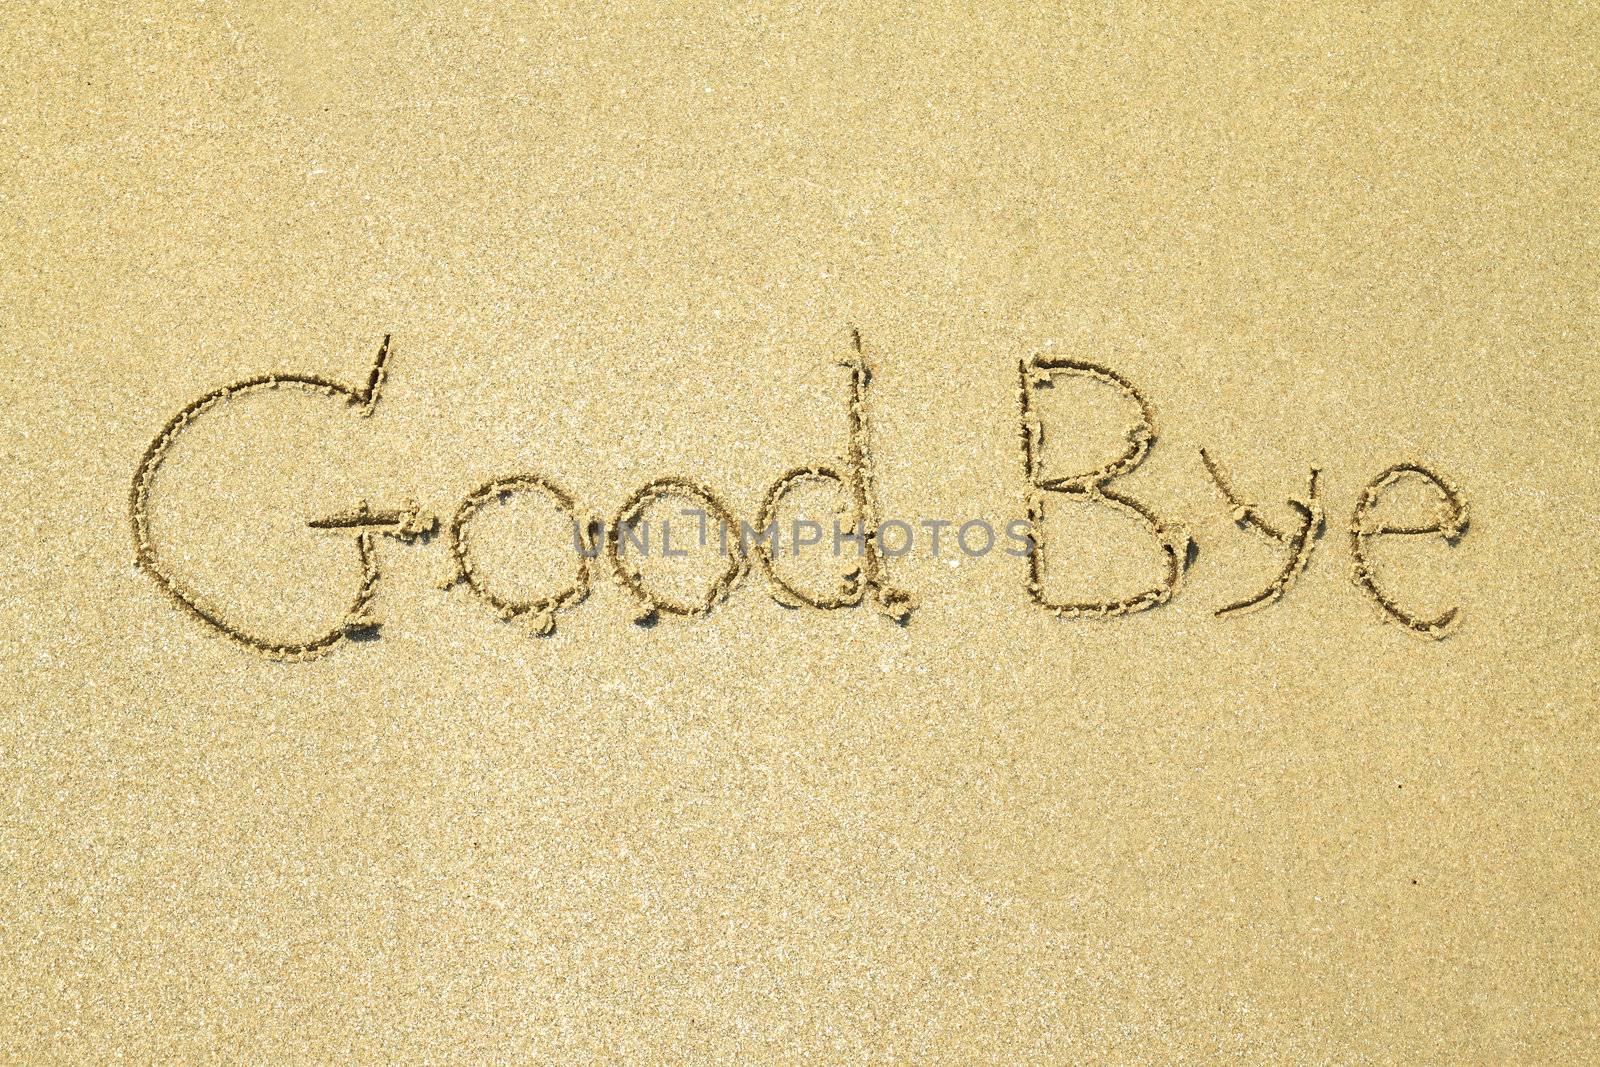 Good bye written on the sand by nuchylee